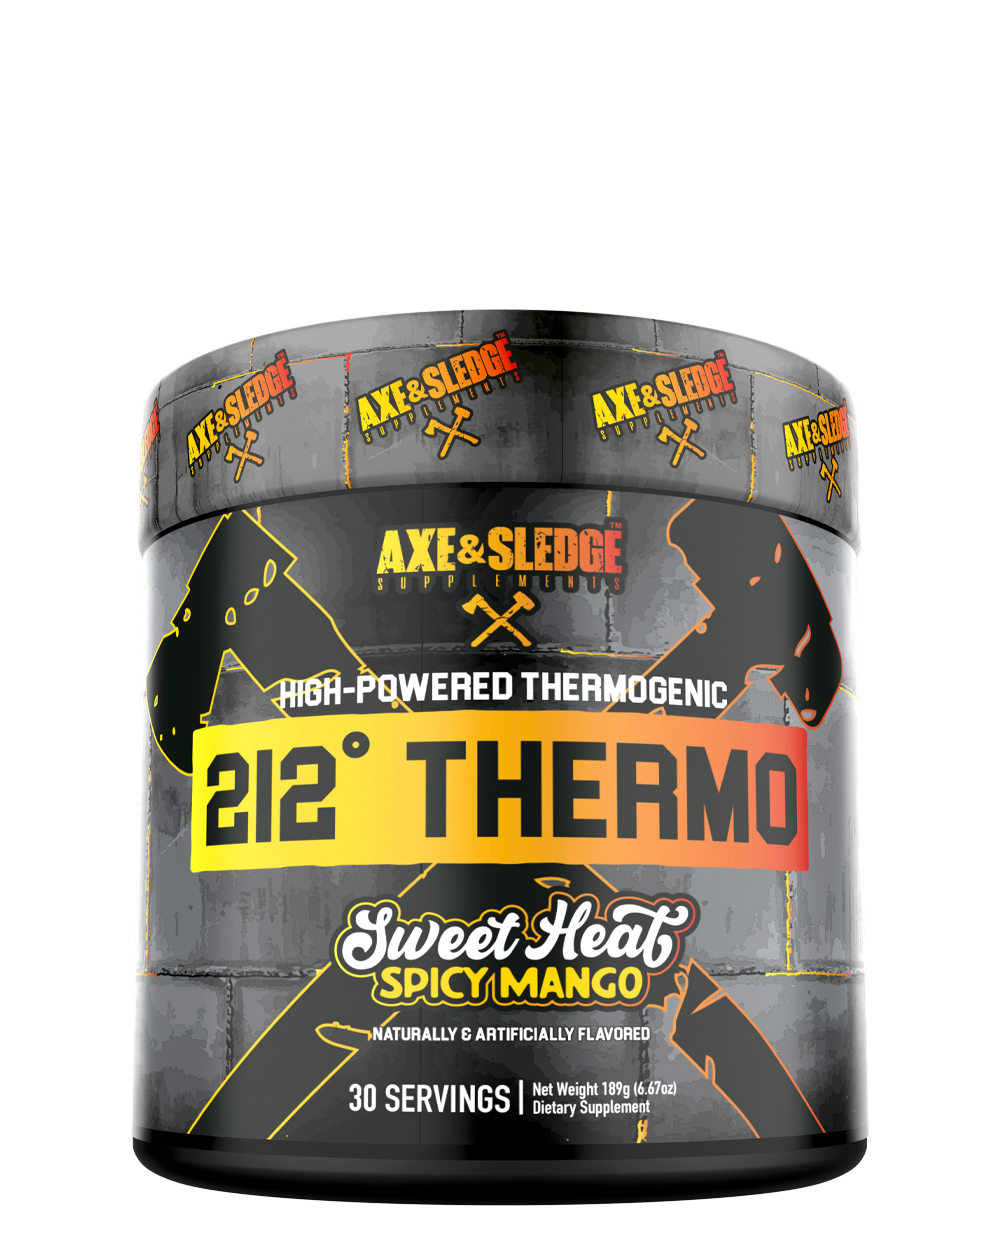 Axe & Sledge 212 Thermo - A1 Supplements Store